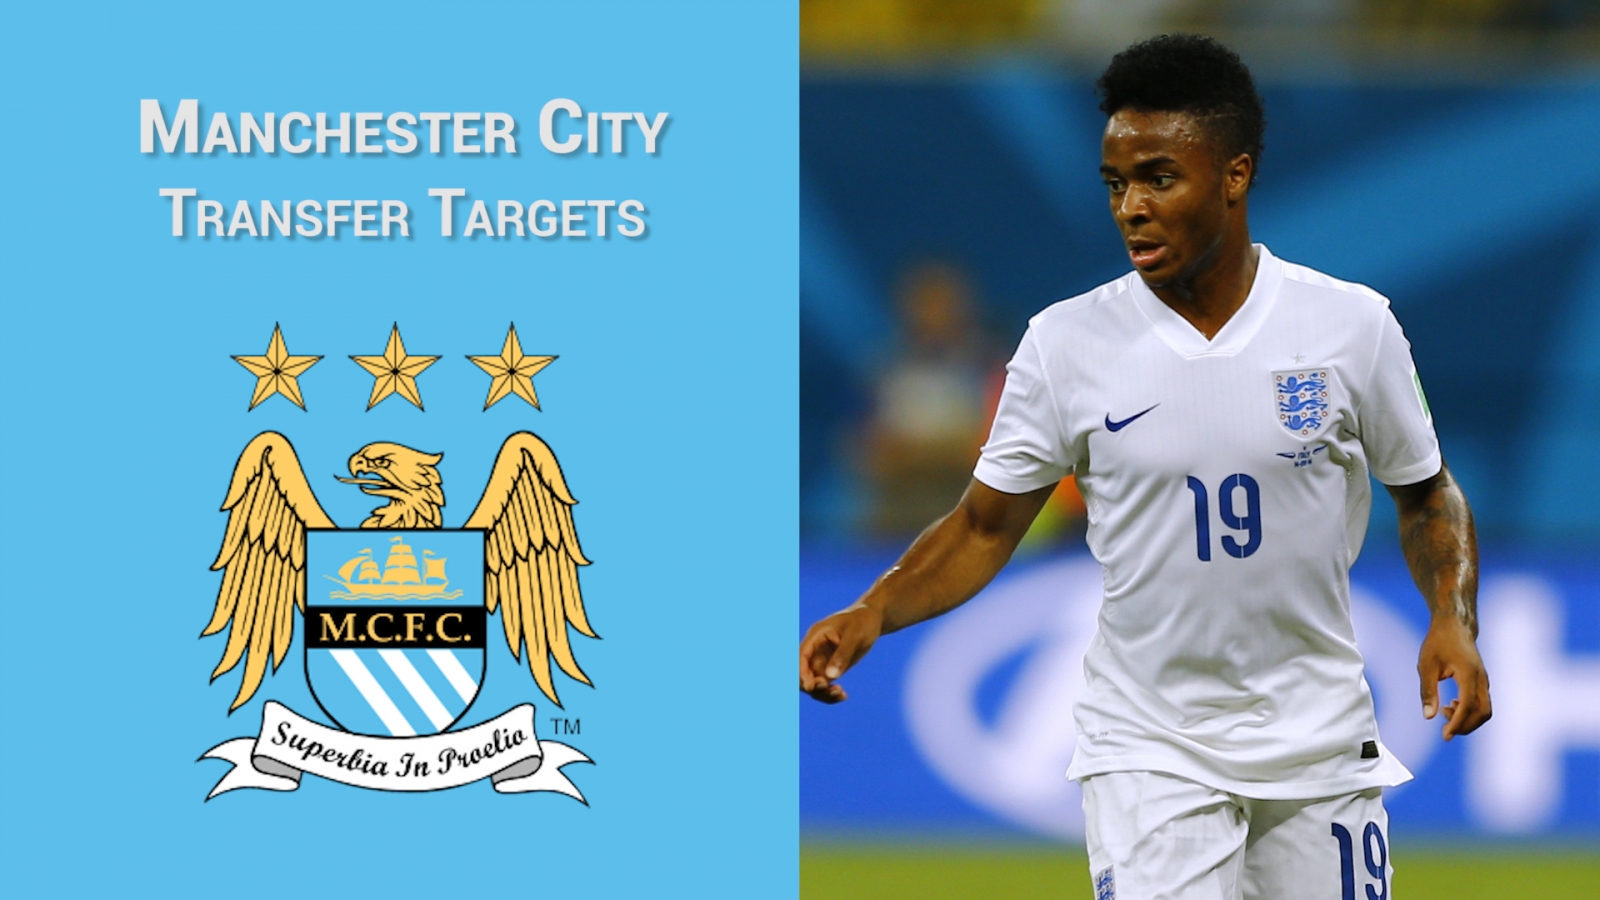 Manchester City transfer targets: Who are the club looking to sign this summer?